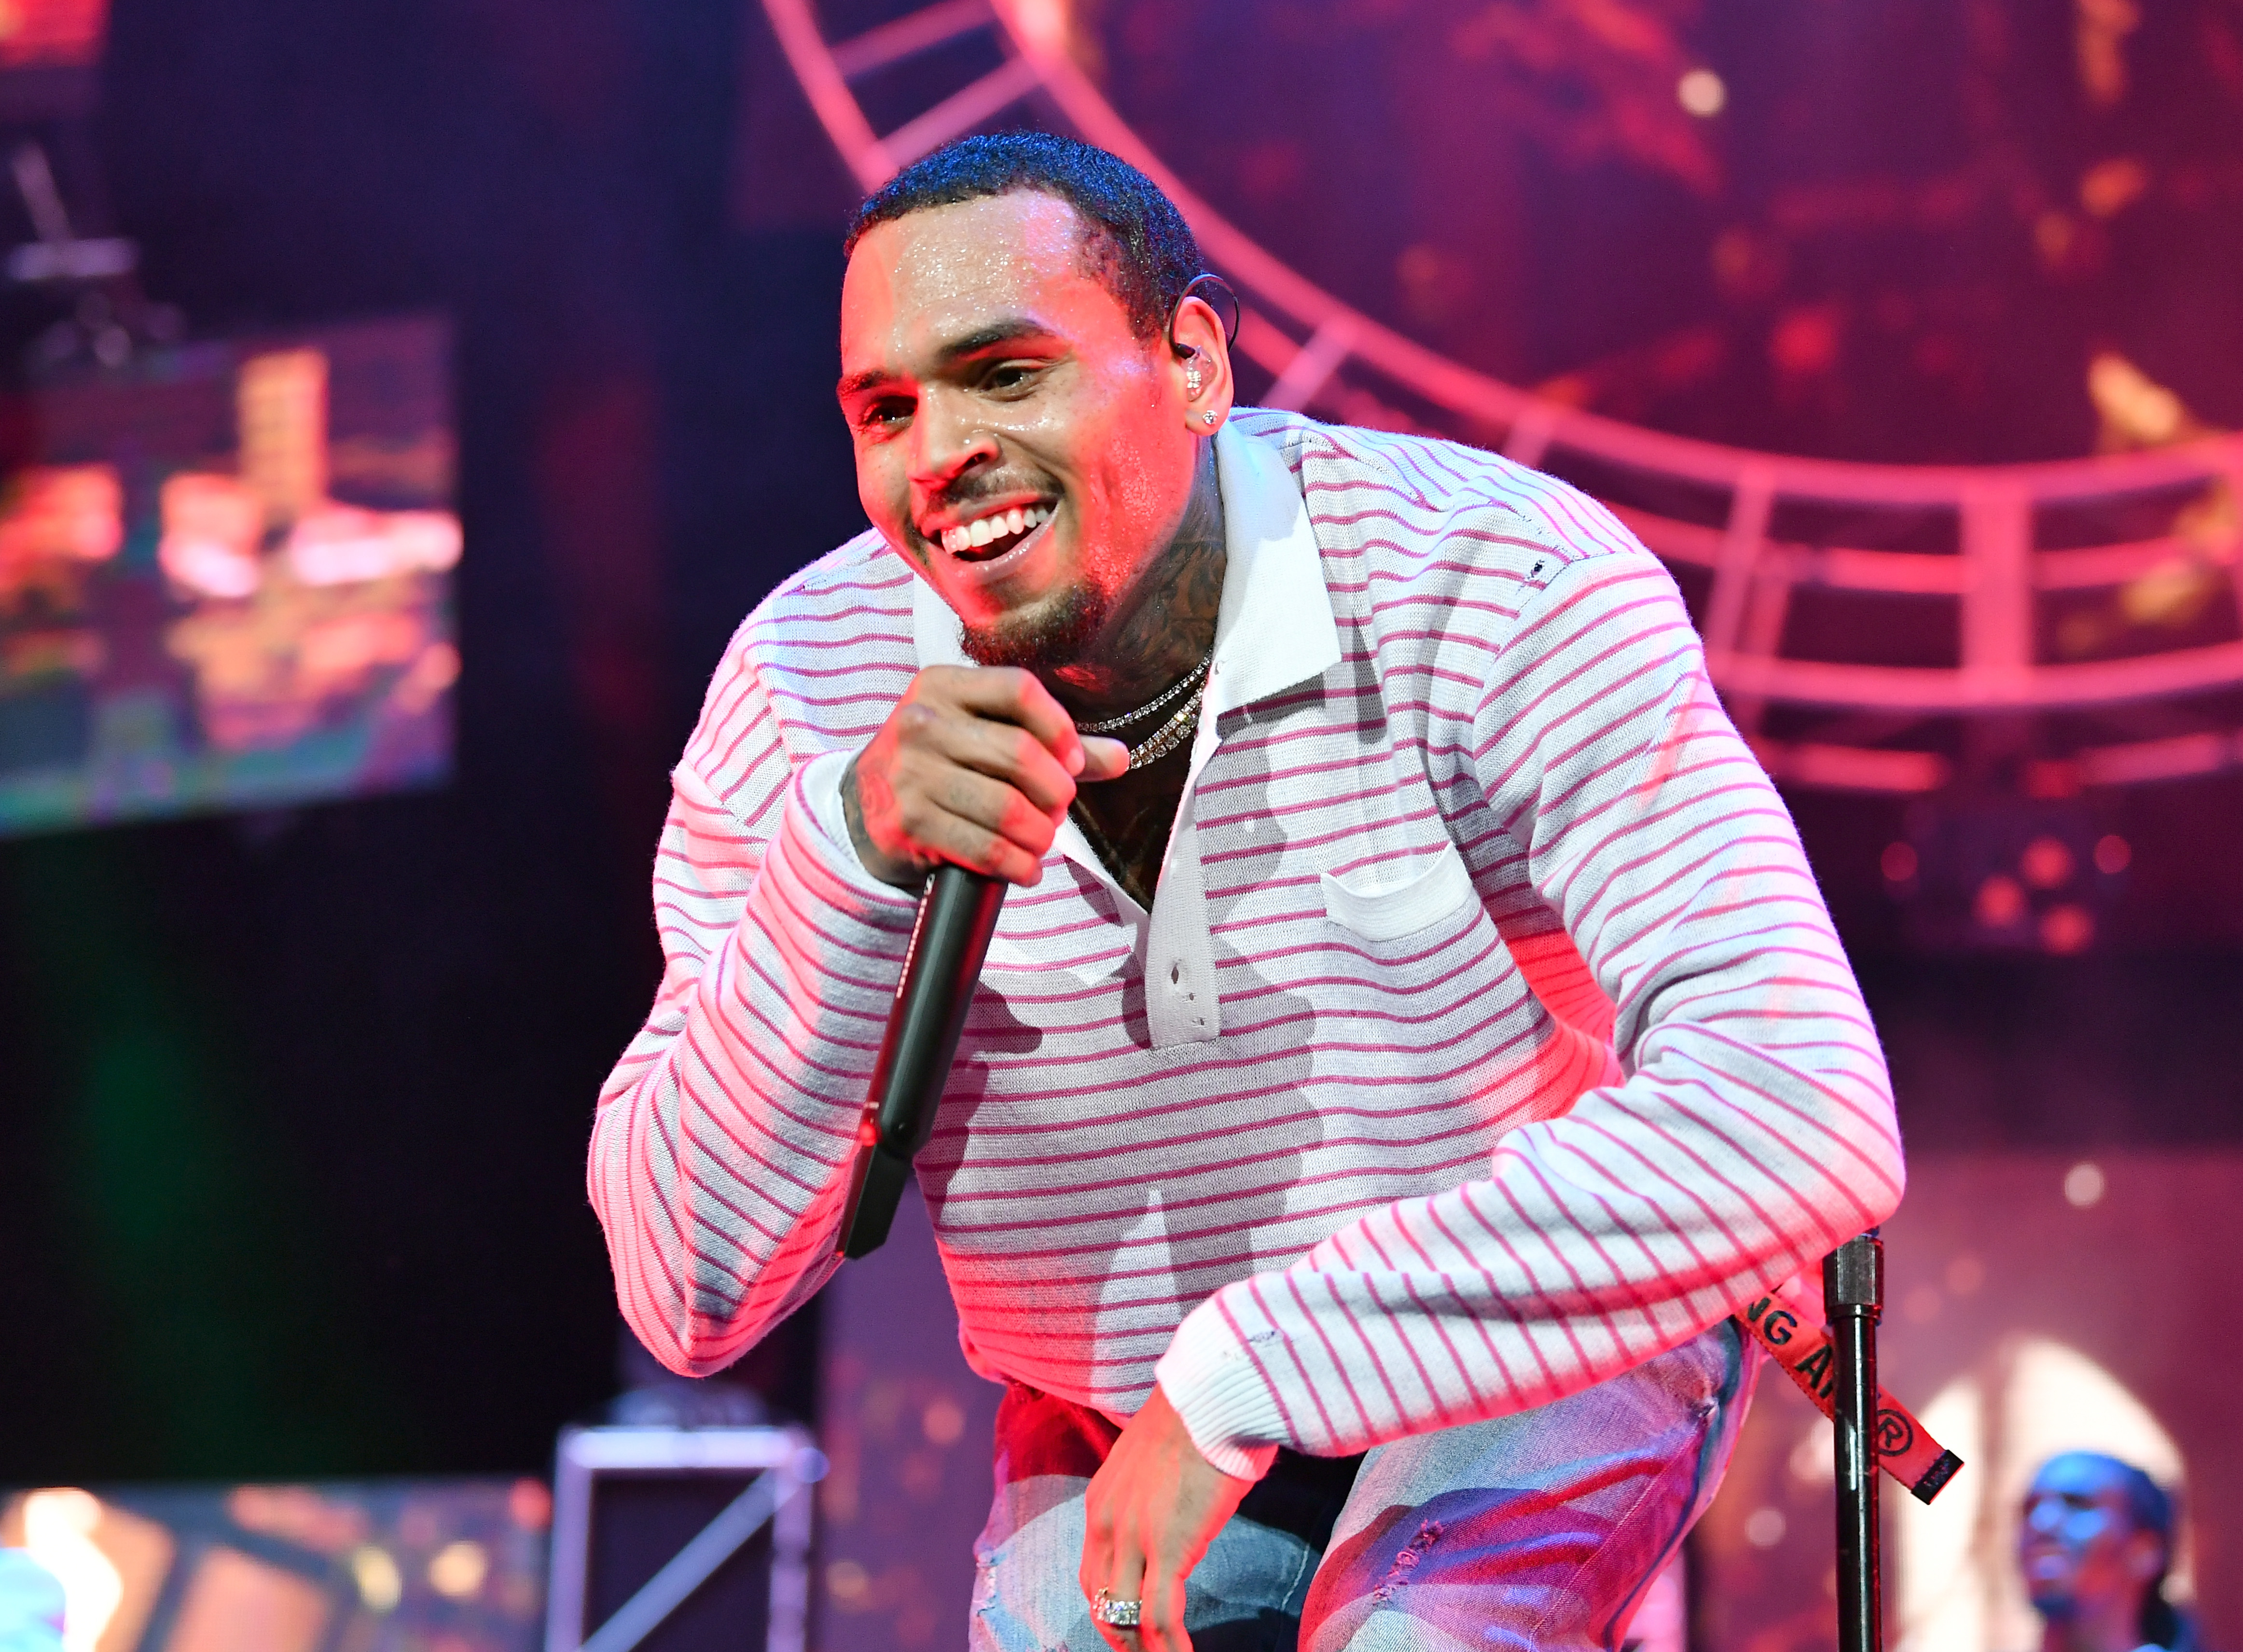 Chris Brown Announces “Indigo” Extended Album With 10 New Songs